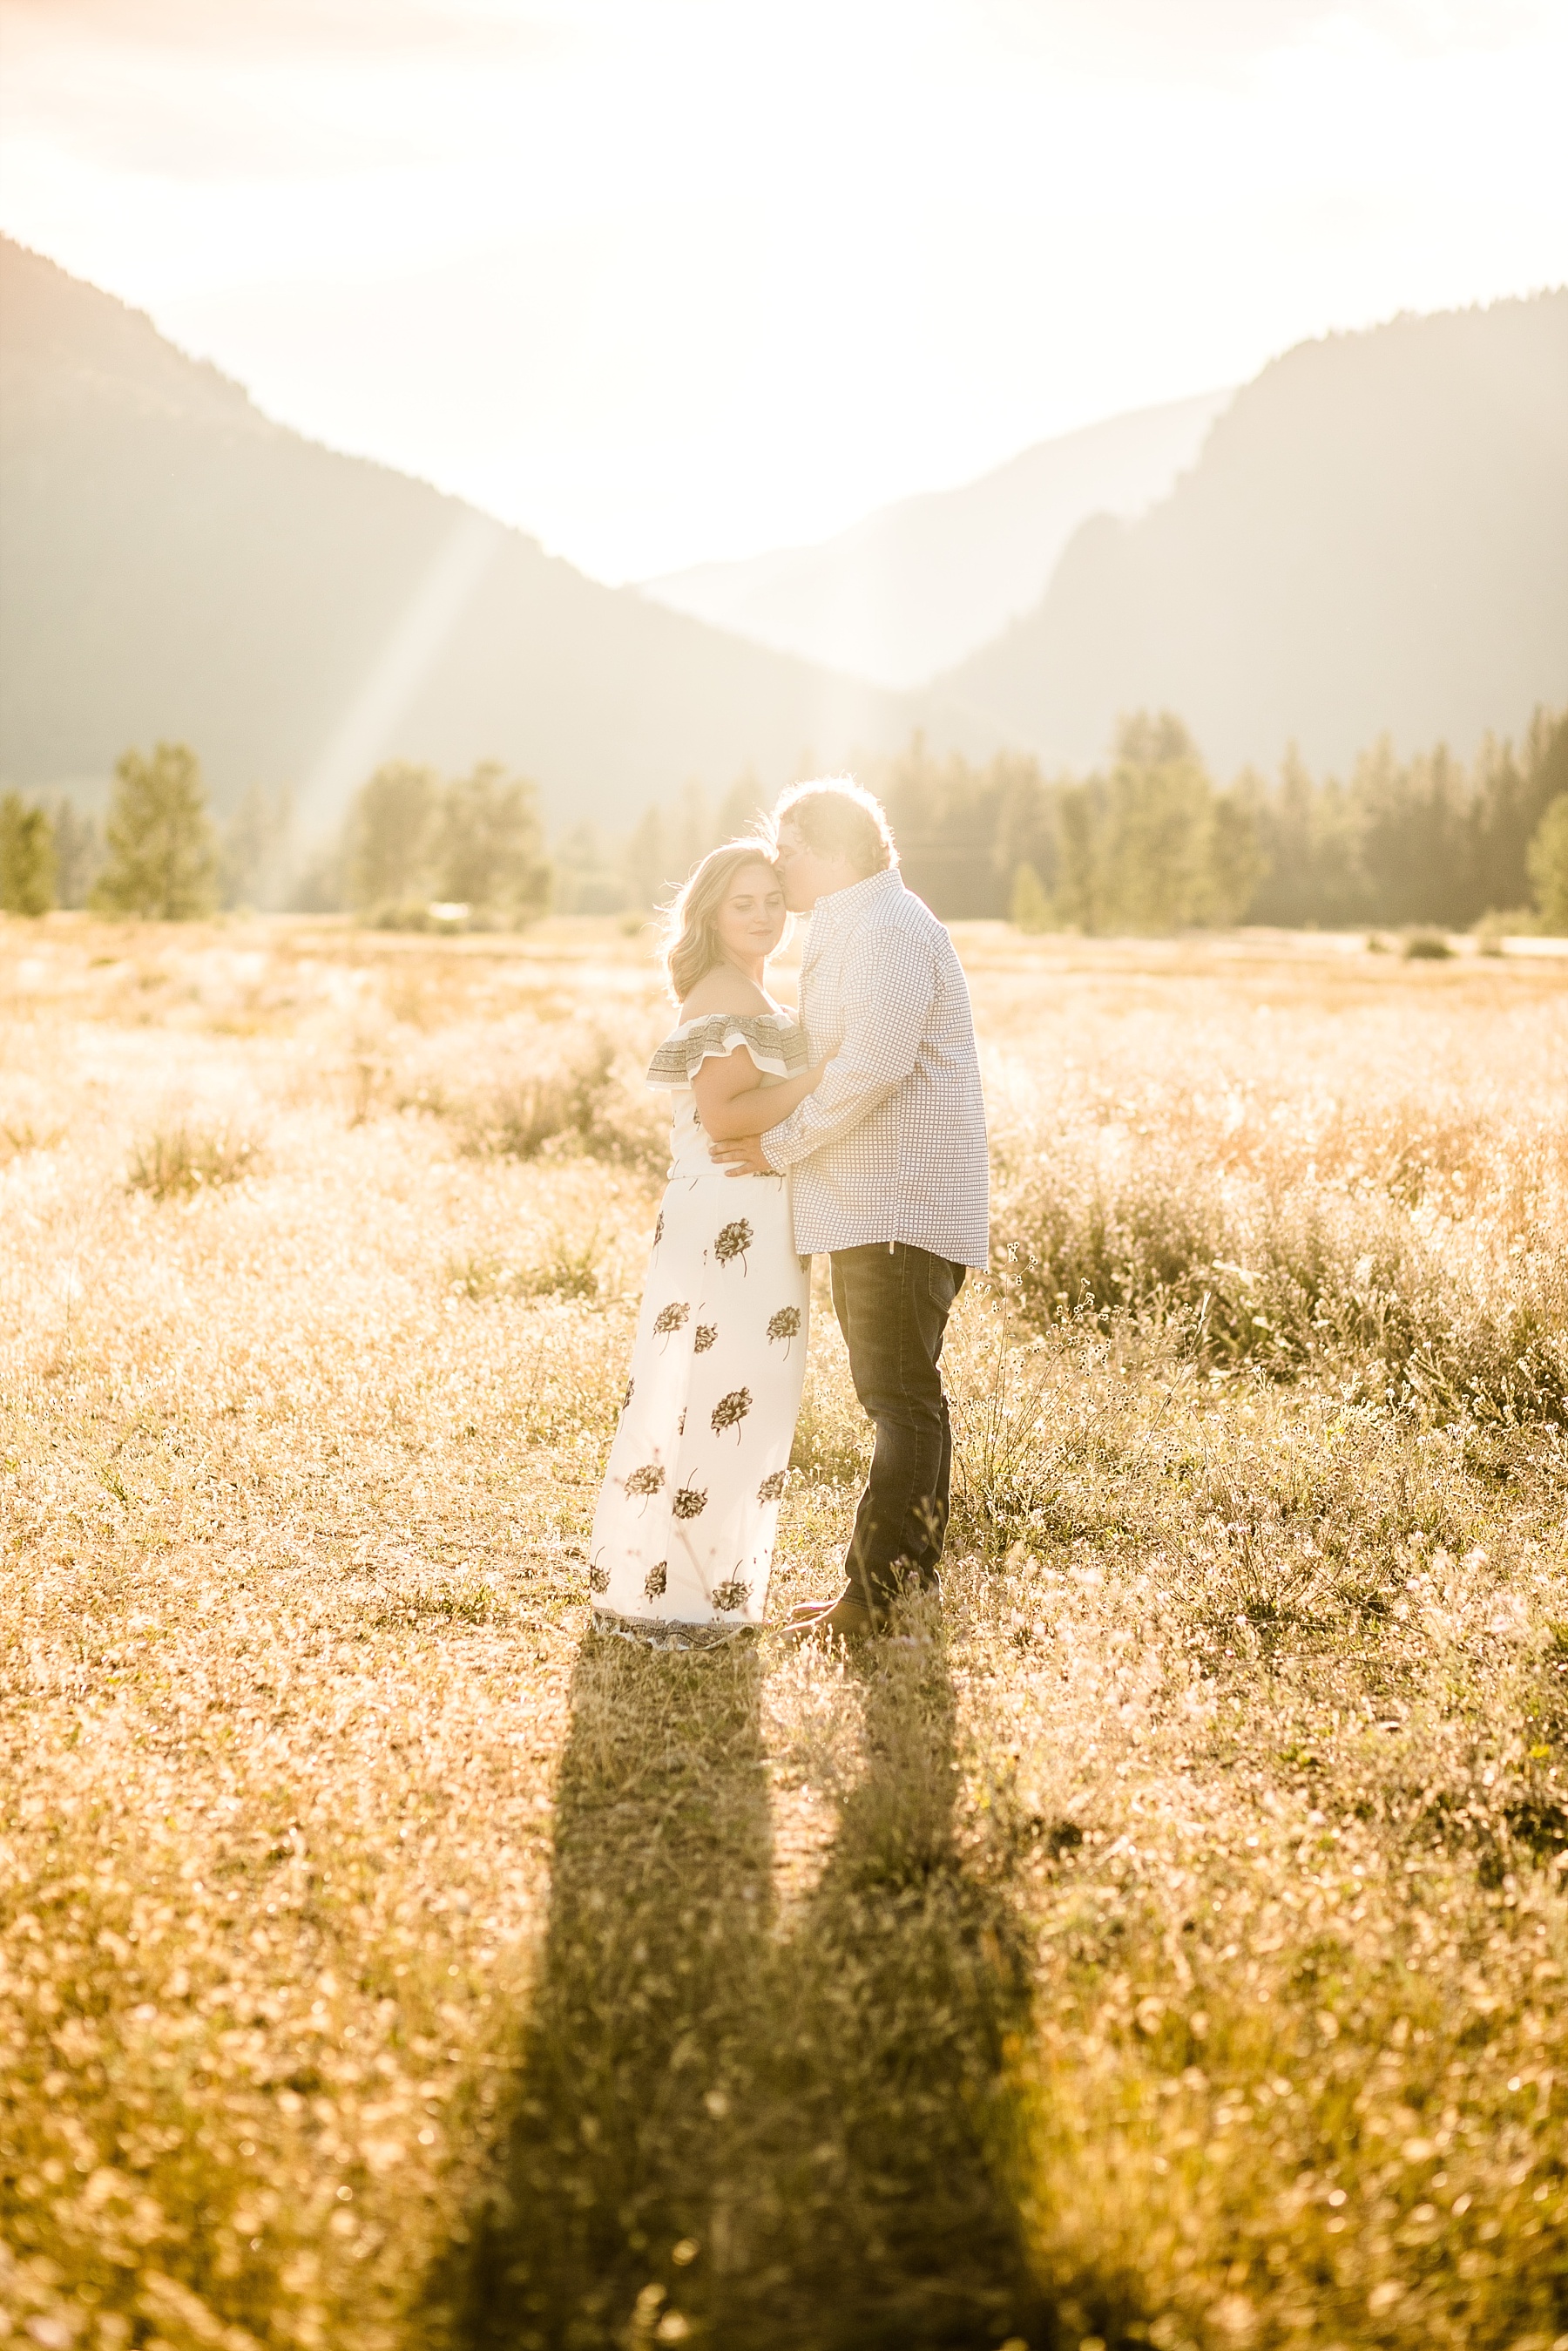 Set in the mountains, Maggie & Justin's Missoula, Montana engagement photos were made of dreams.